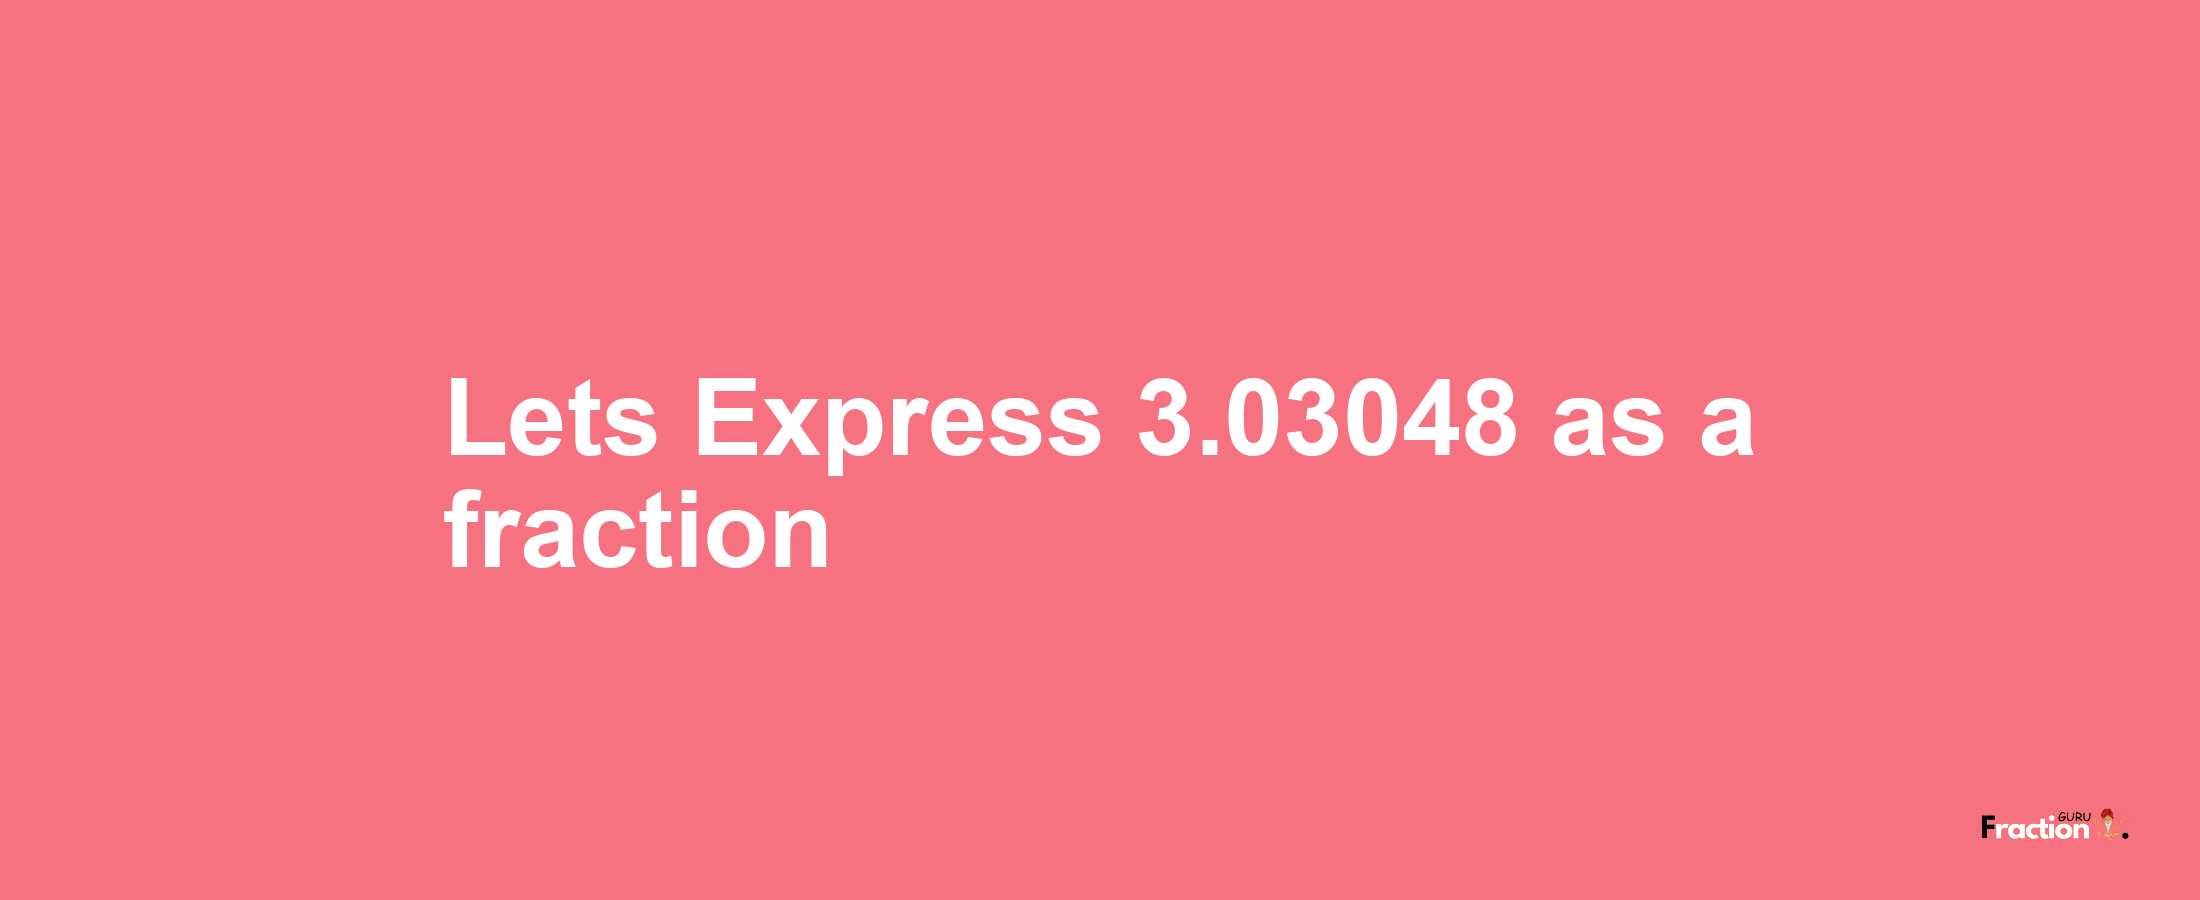 Lets Express 3.03048 as afraction